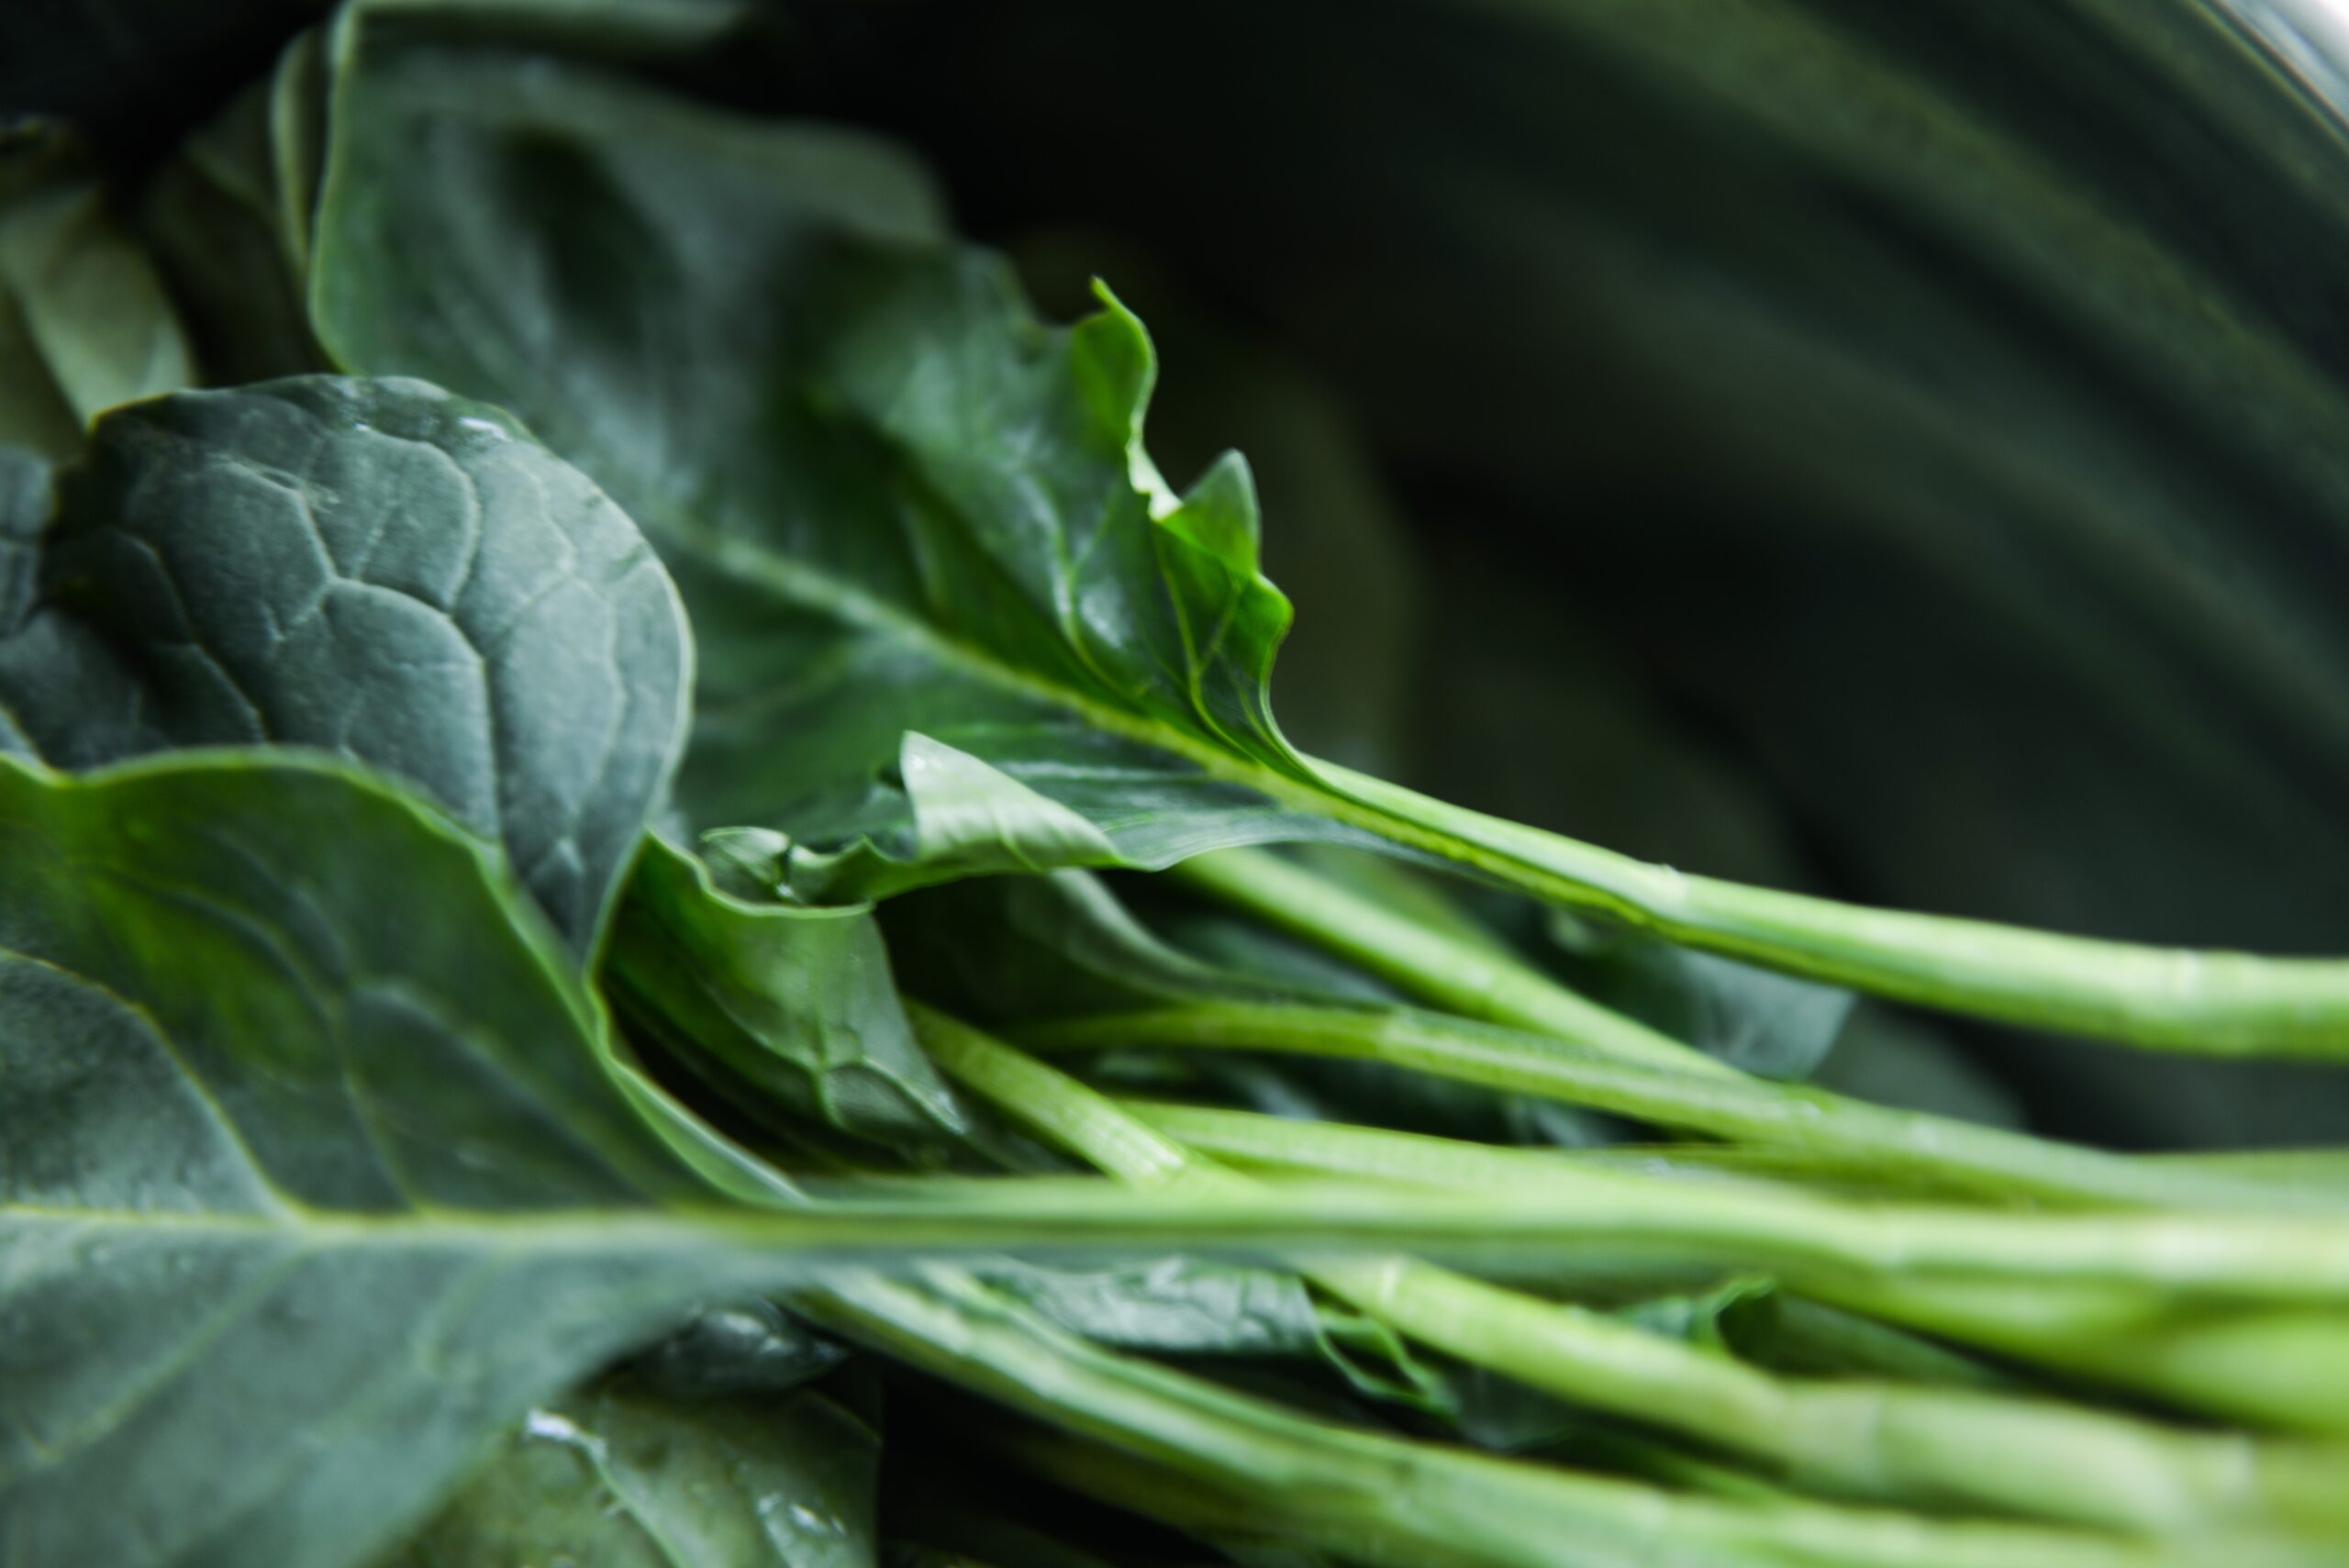 Close up of Spinach greens including stems